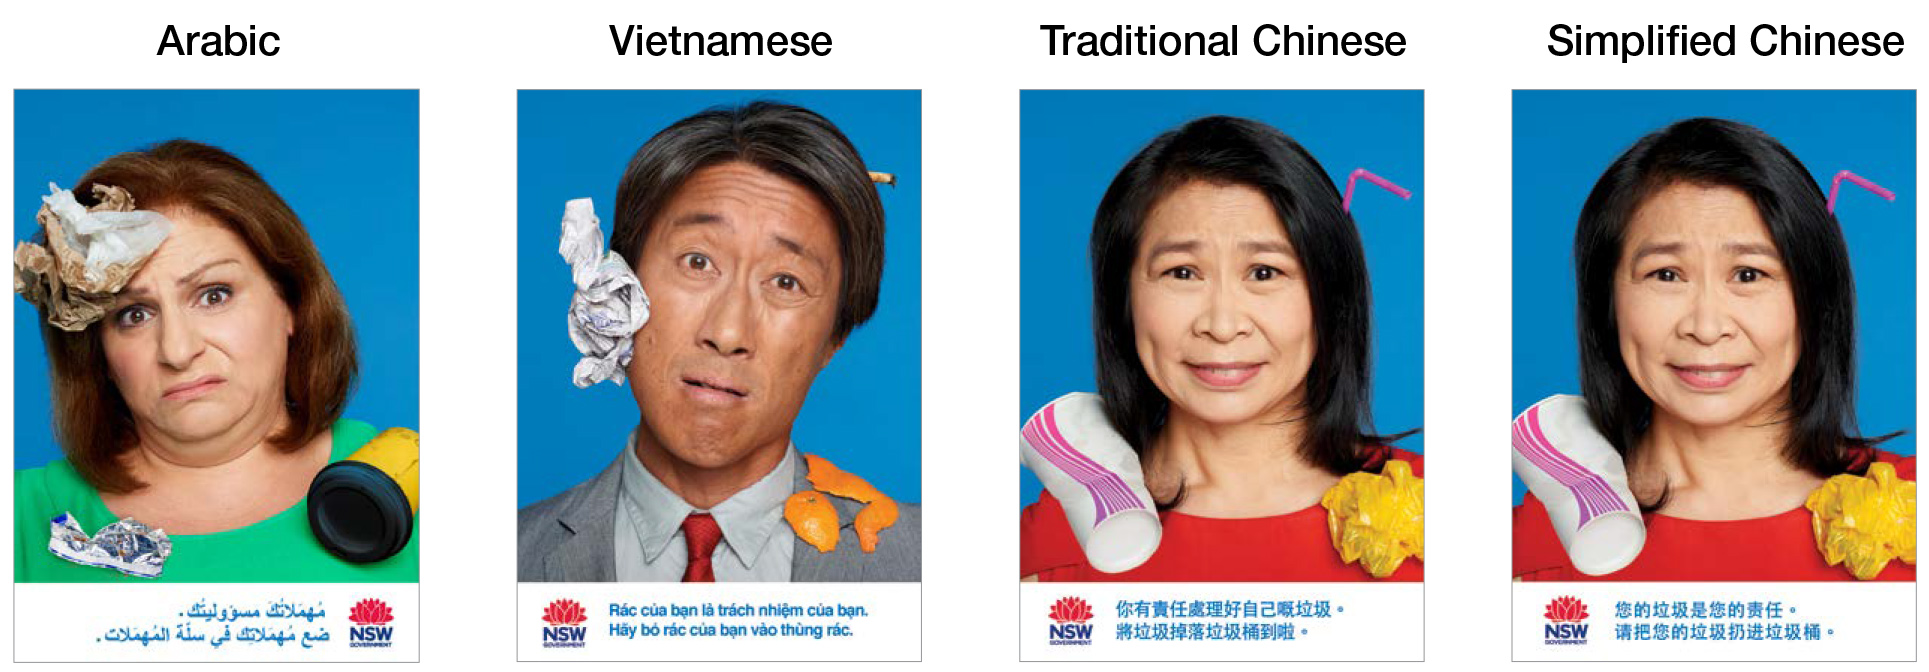 Culturally and Linguistically Diverse ad campaign for Don't be a Tosser!